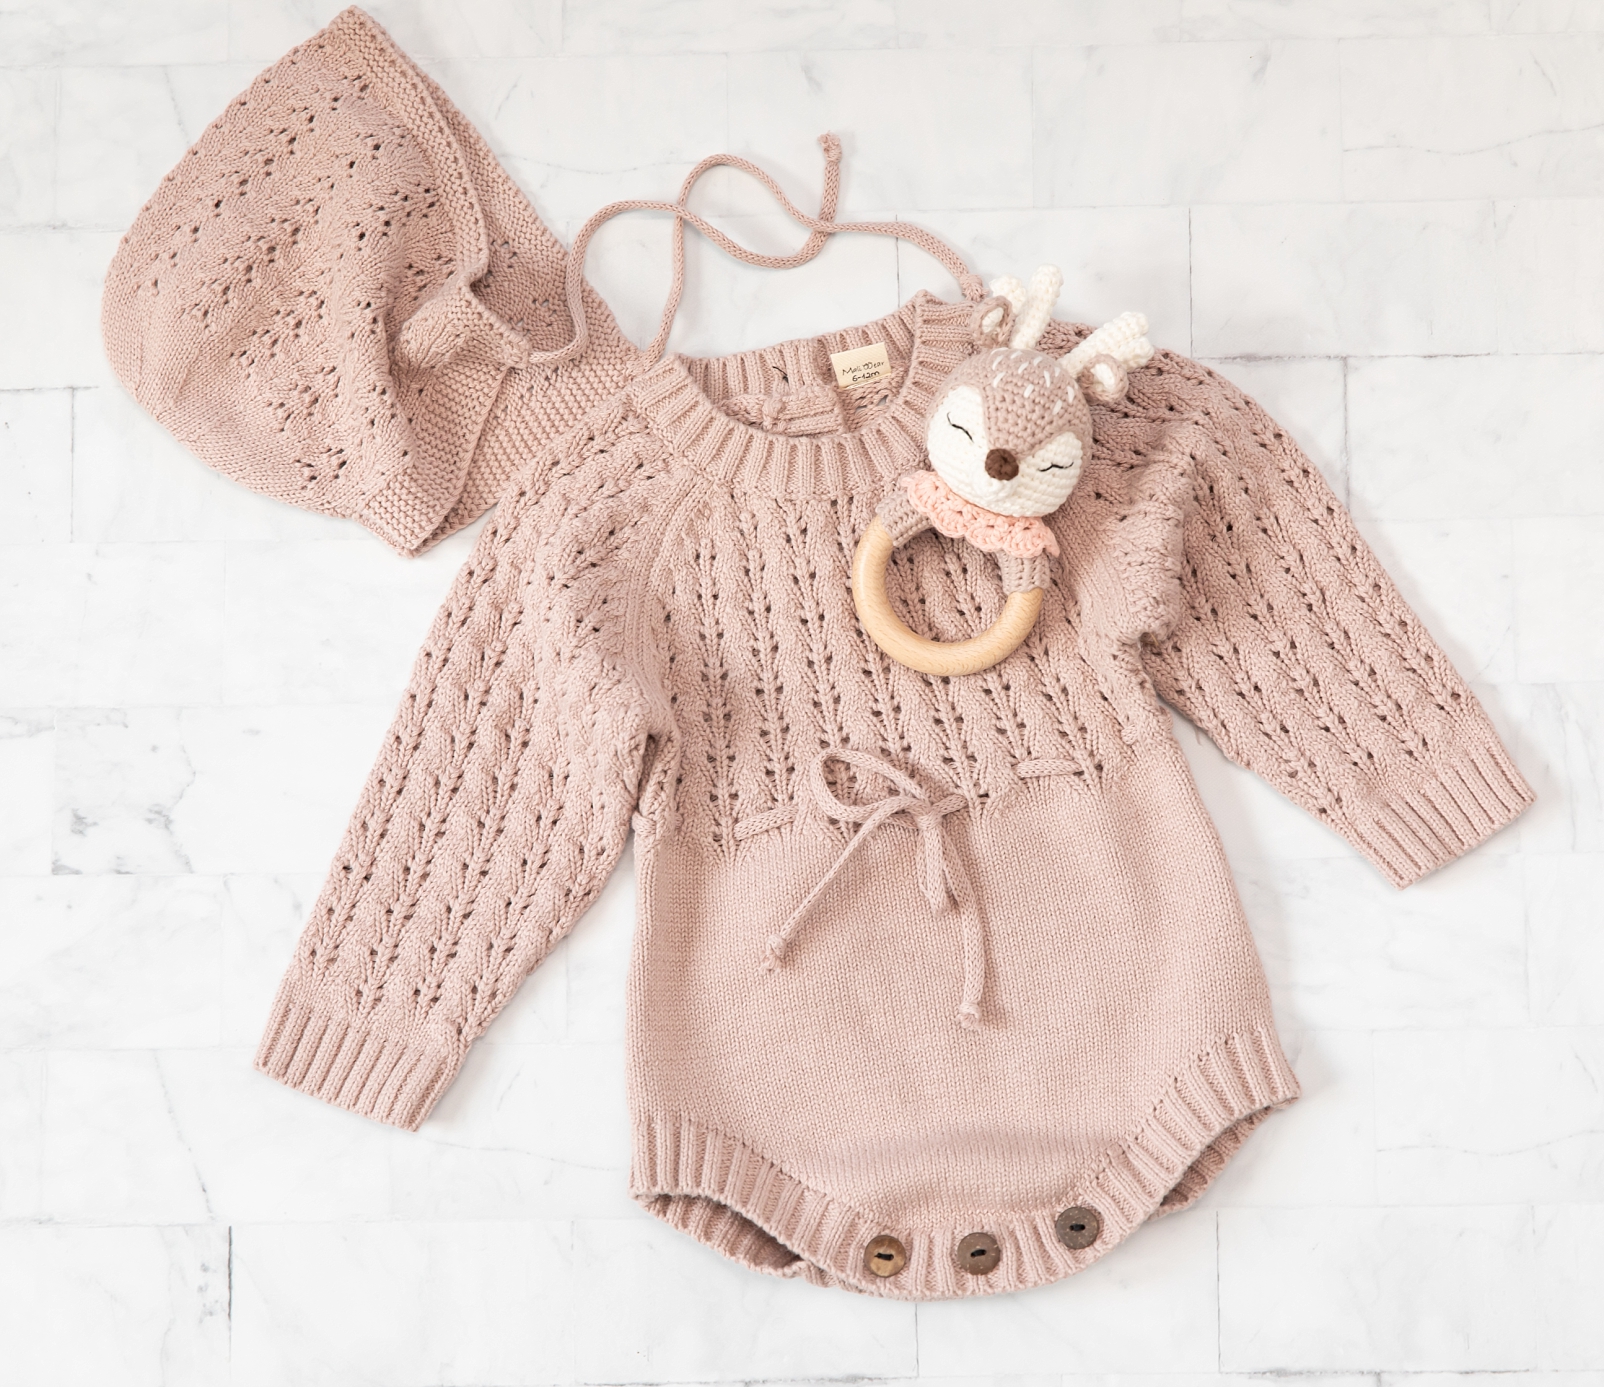 Knit baby outfit, bonnet, and rattle in mauve